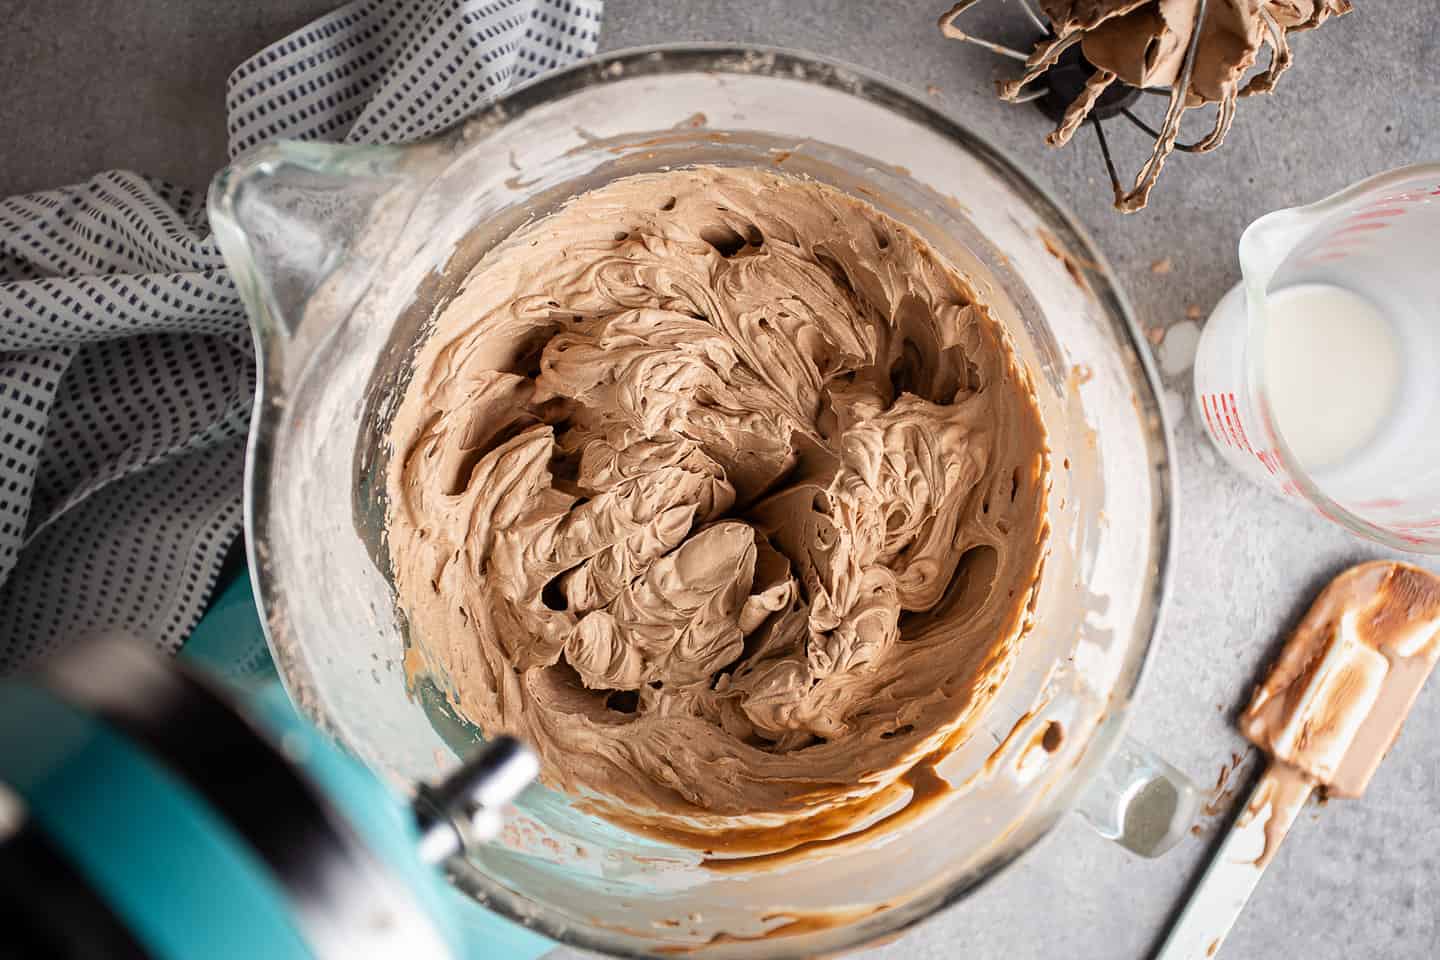 Freshly made chocolate whipped cream frosting in the bowl of a stand mixer.